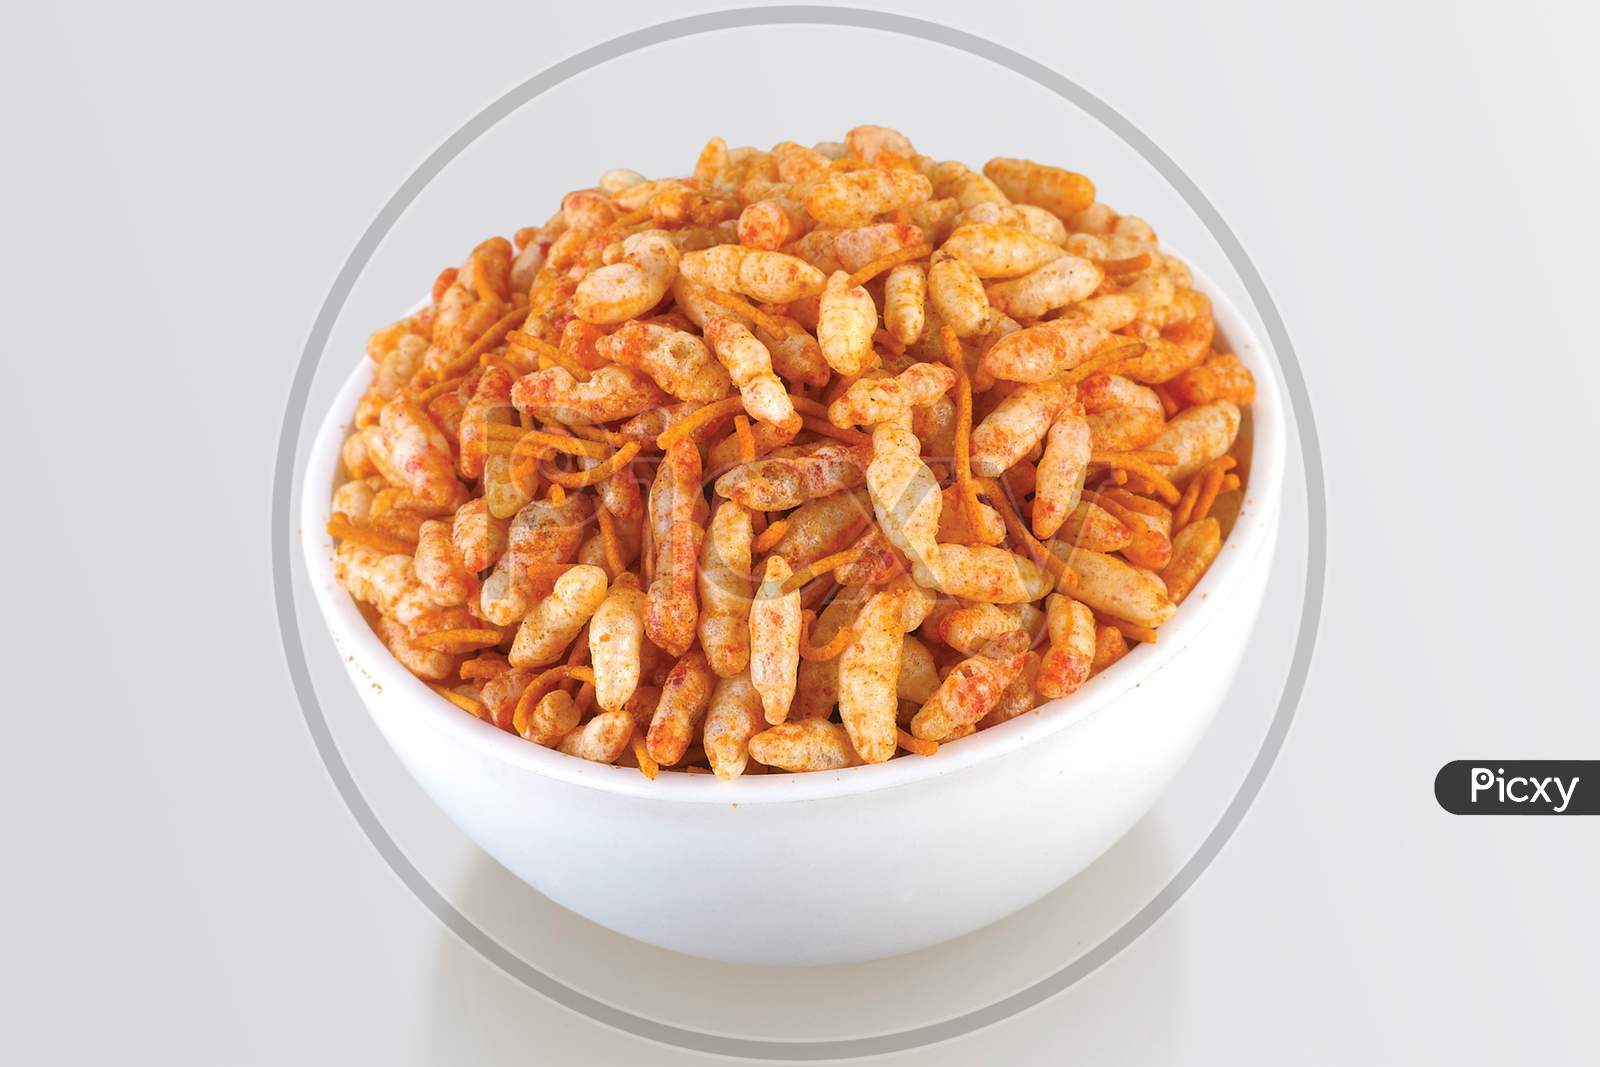 Sev Mamra Is An Indian Snack. Garlic & Spices Sev Mamra, It Is A Mixture Of Spicy Dry Ingredients Such As Puffed Rice, Savoury Noodles And Peanuts - Image